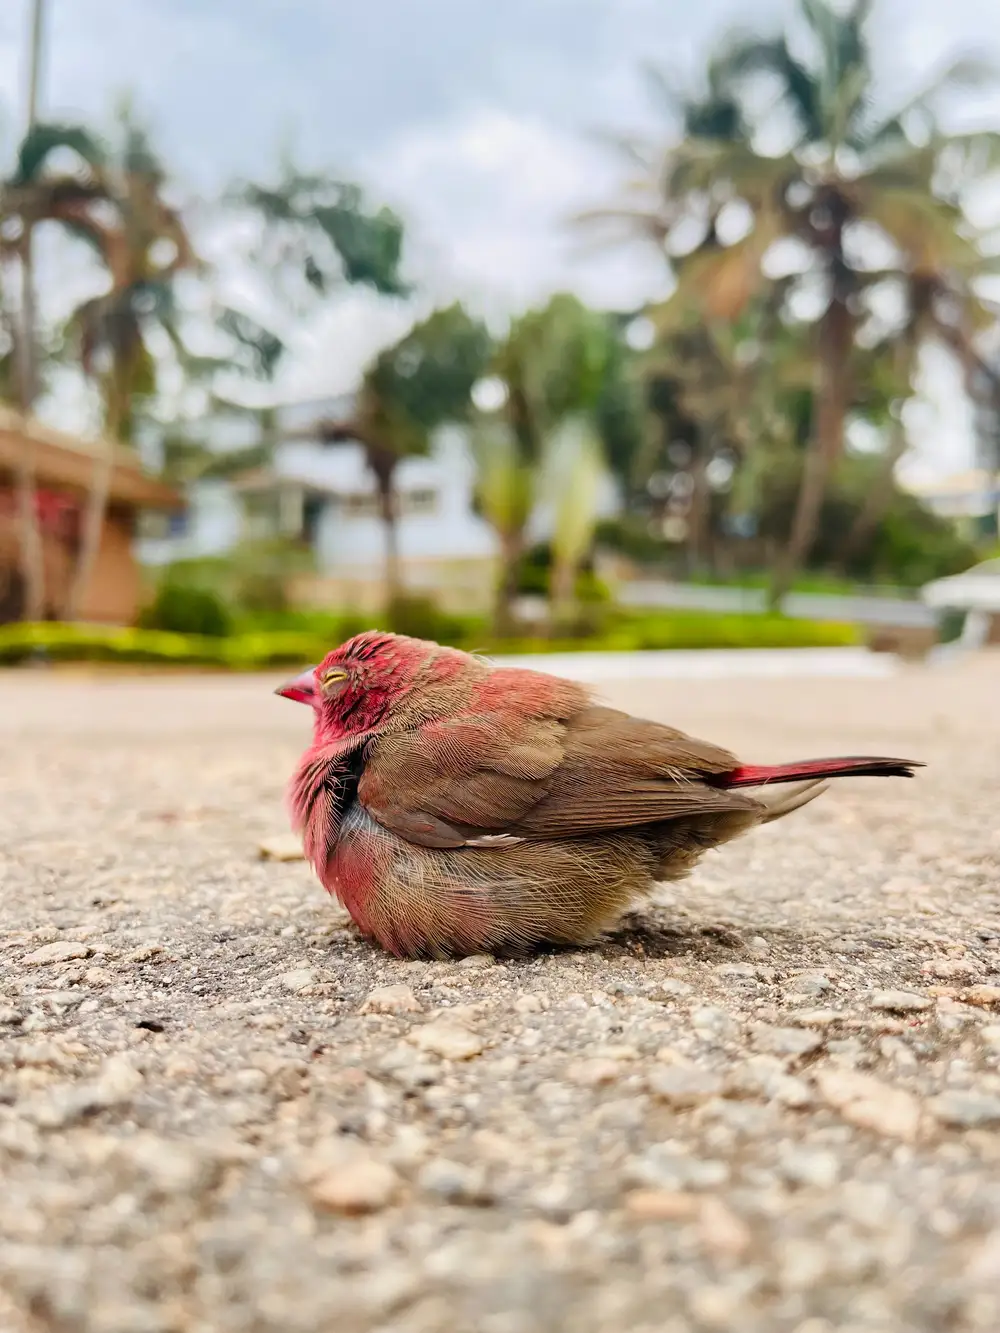 A bird sitting on the road